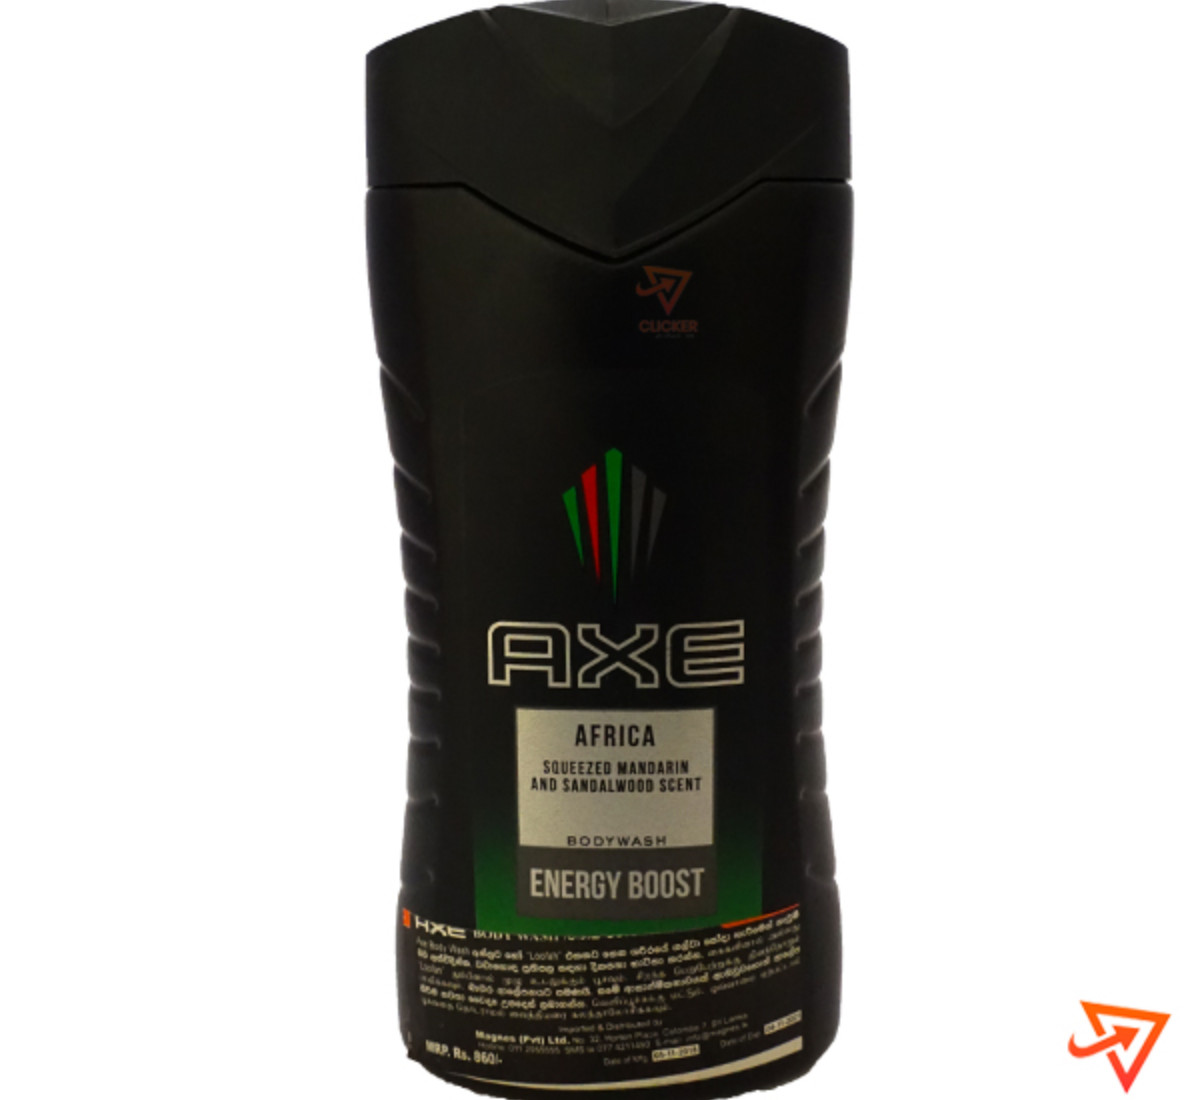 Clicker product 250ml AXE energy boost body wash 1062